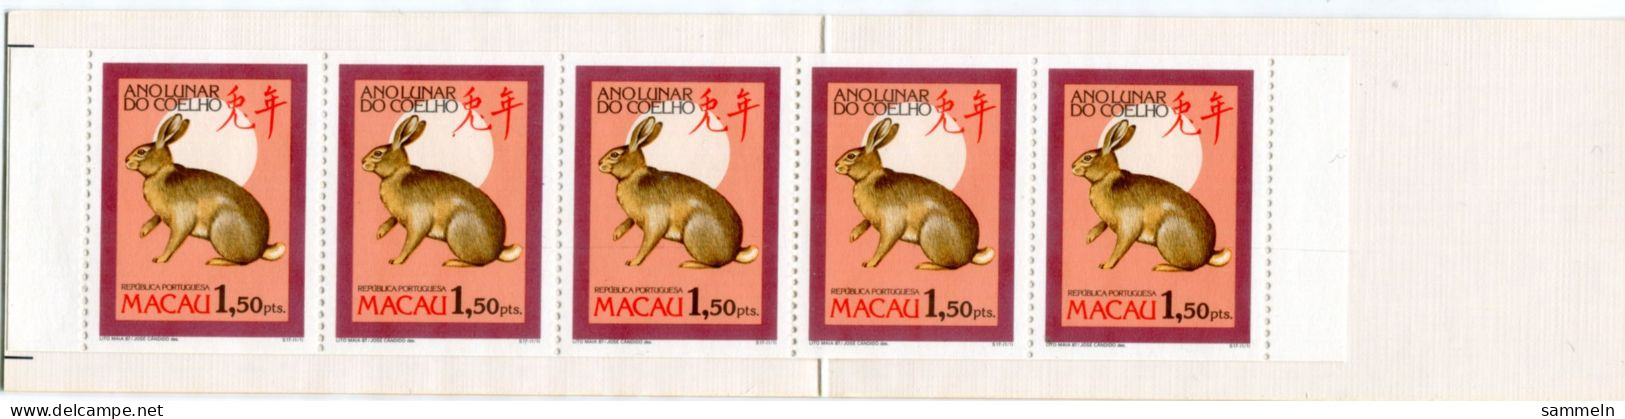 MACAO 568 C MH Mnh - Chinesisches Jahr Des Kaninchens, Chinese Year Of The Rabbit, Année Chinoise Du Lapin - MACAU - Libretti